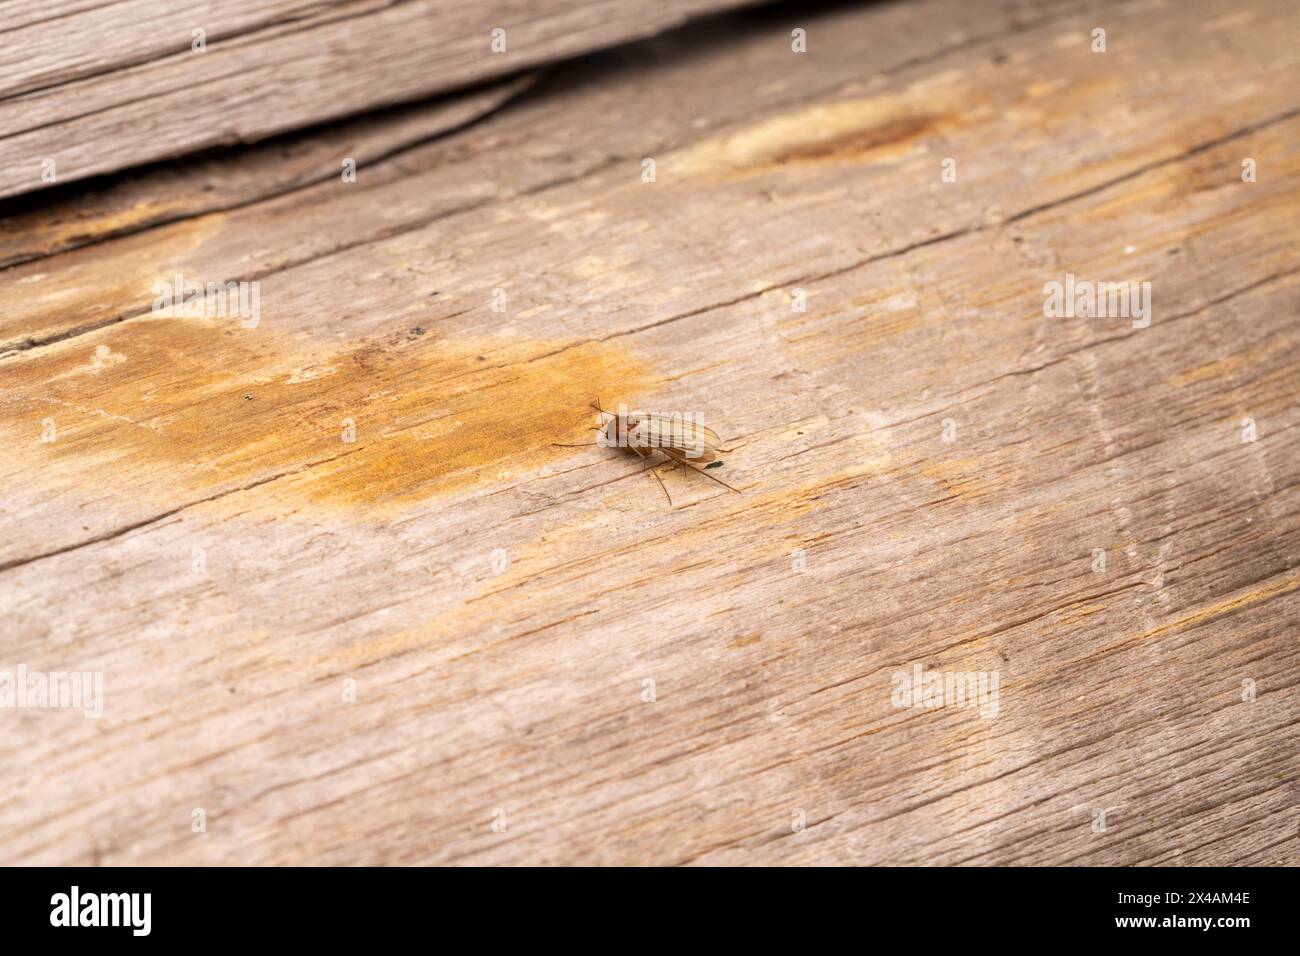 Genus Mycetophila Family Mycetophilidae Fungus gnat wild nature insect picture, wallpaper, photography Stock Photo